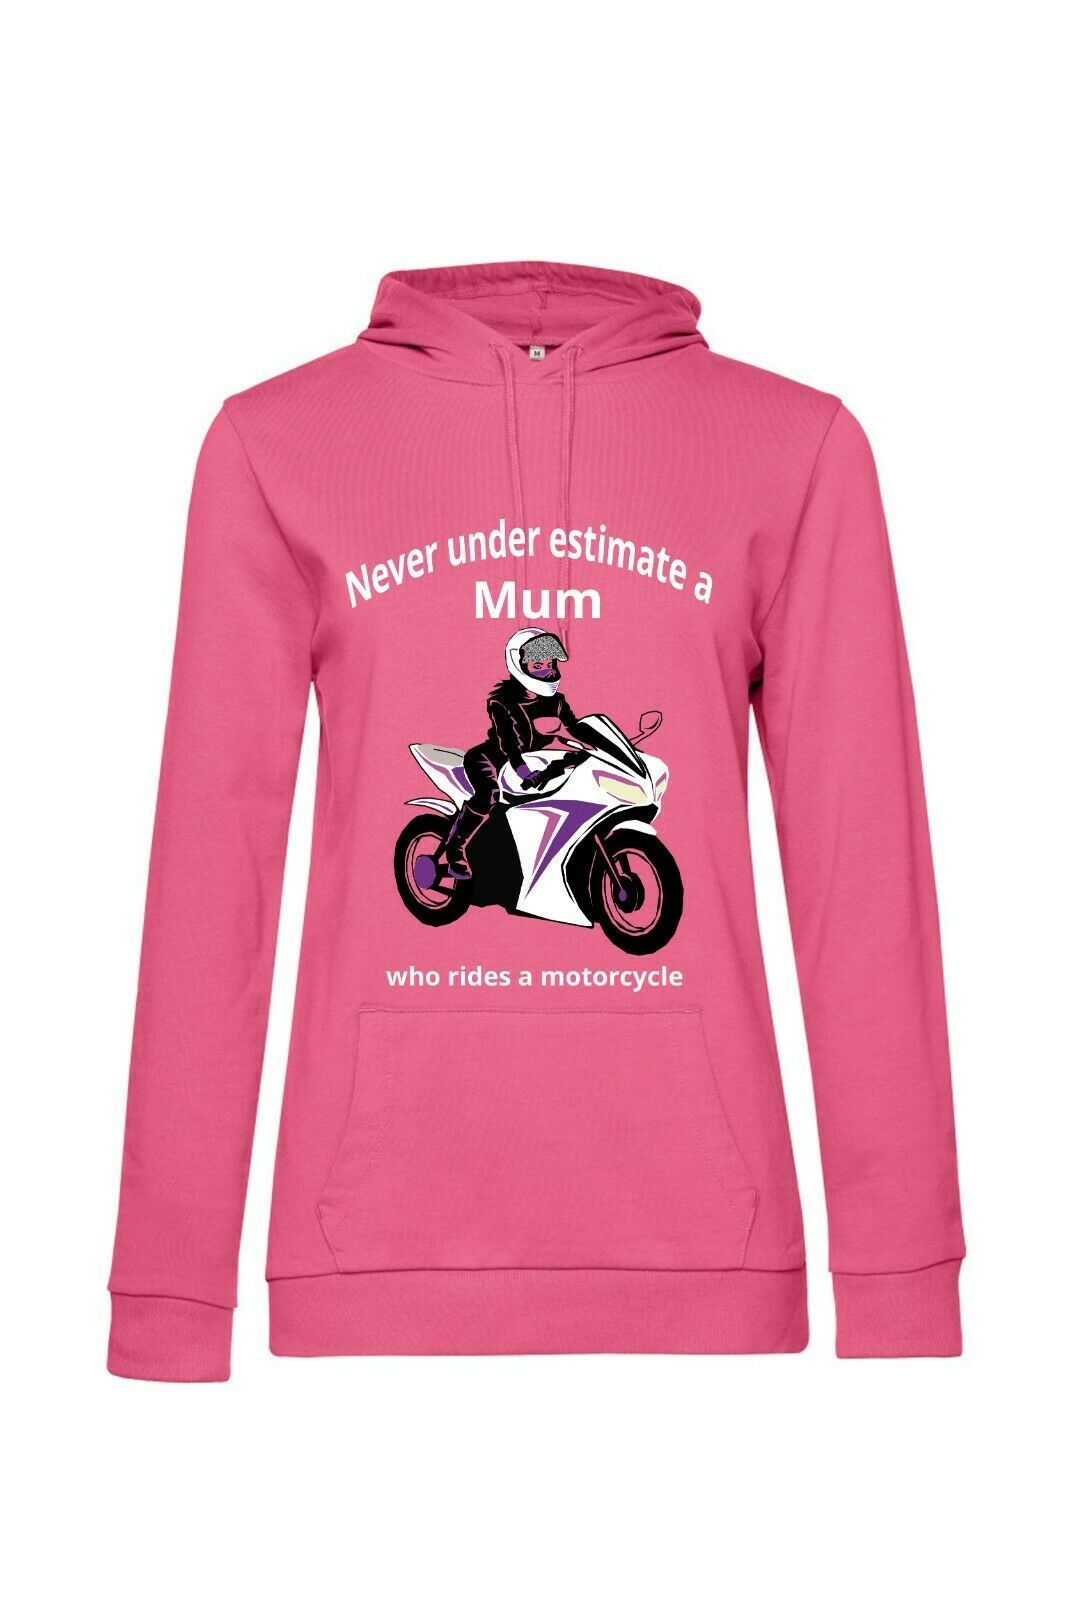 Never under estimate a Mum who rides a motorcycle pink women hoodie